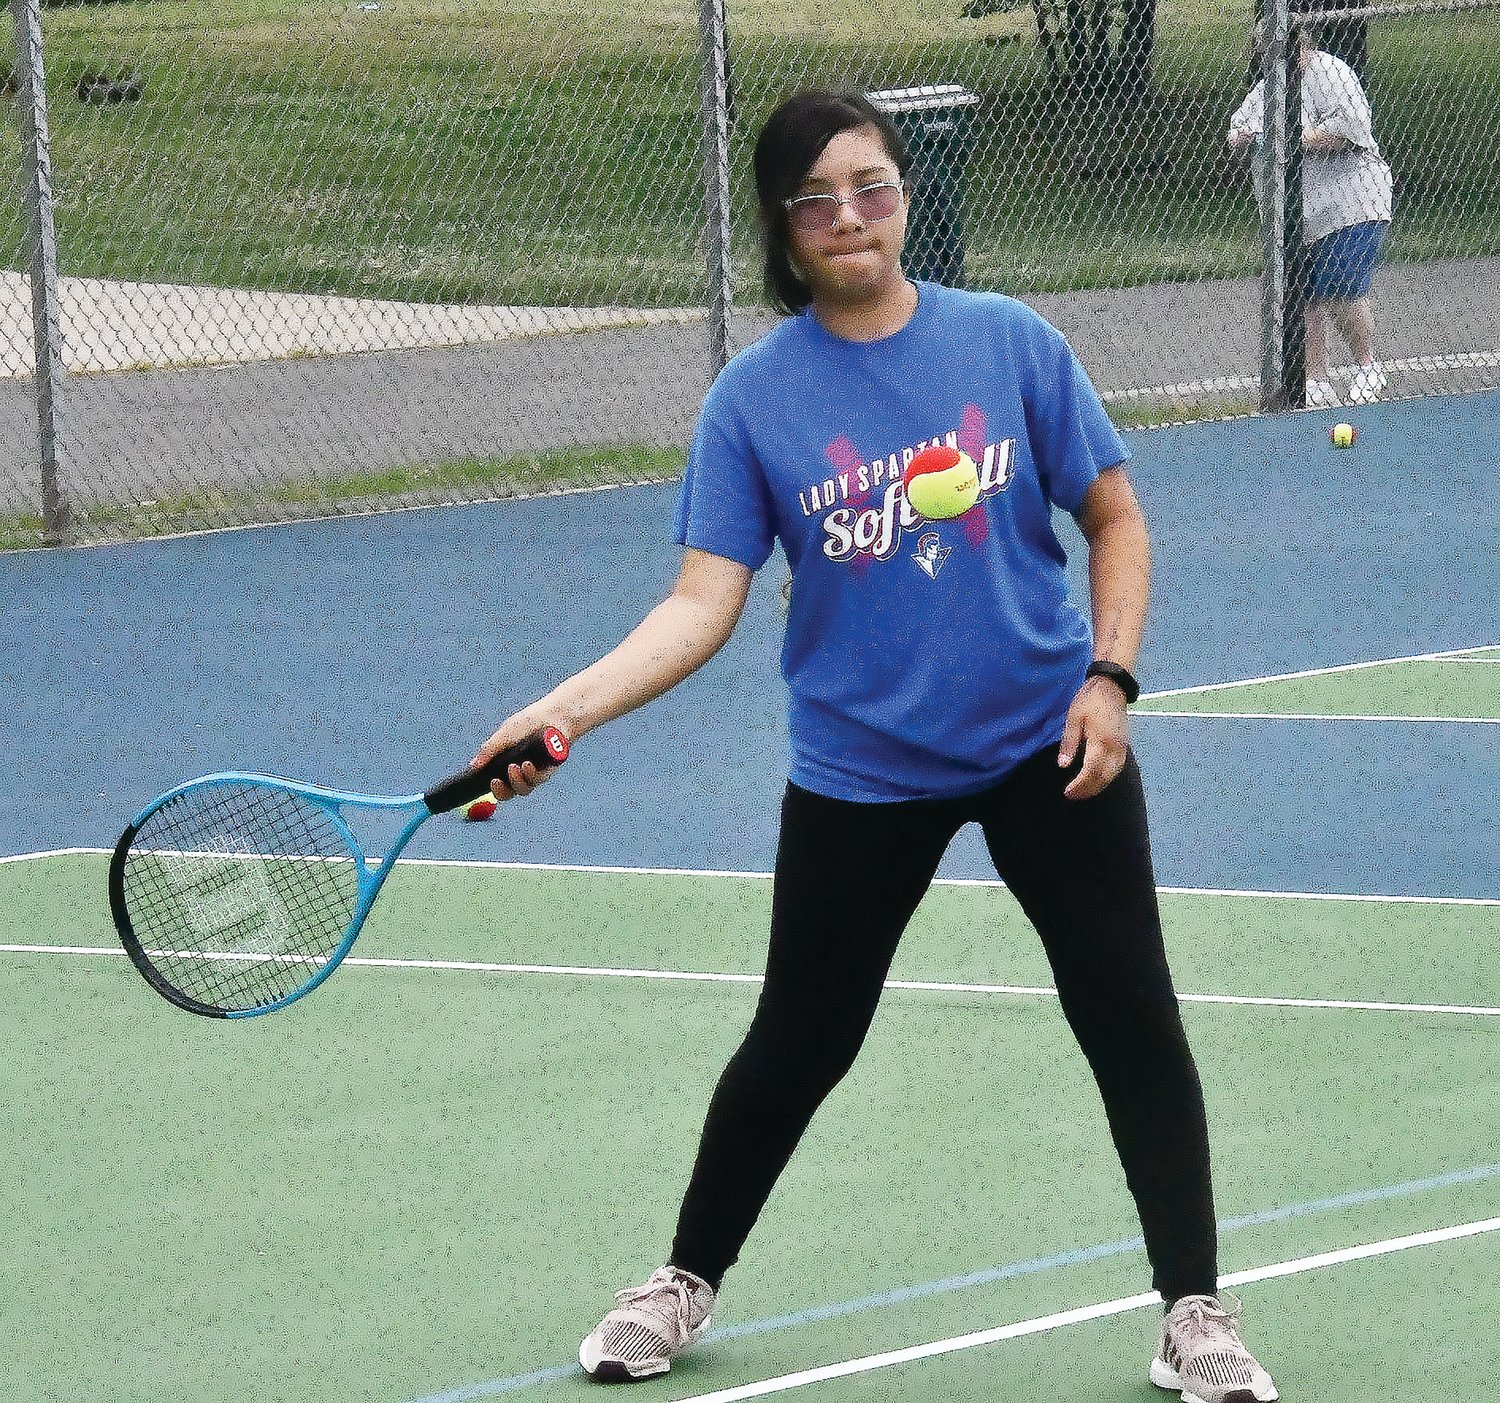 Natalie Perez prepares to hit the ball during tennis lessons on Friday, June 24, at the Shelter One Courts inside Rothwell Park.